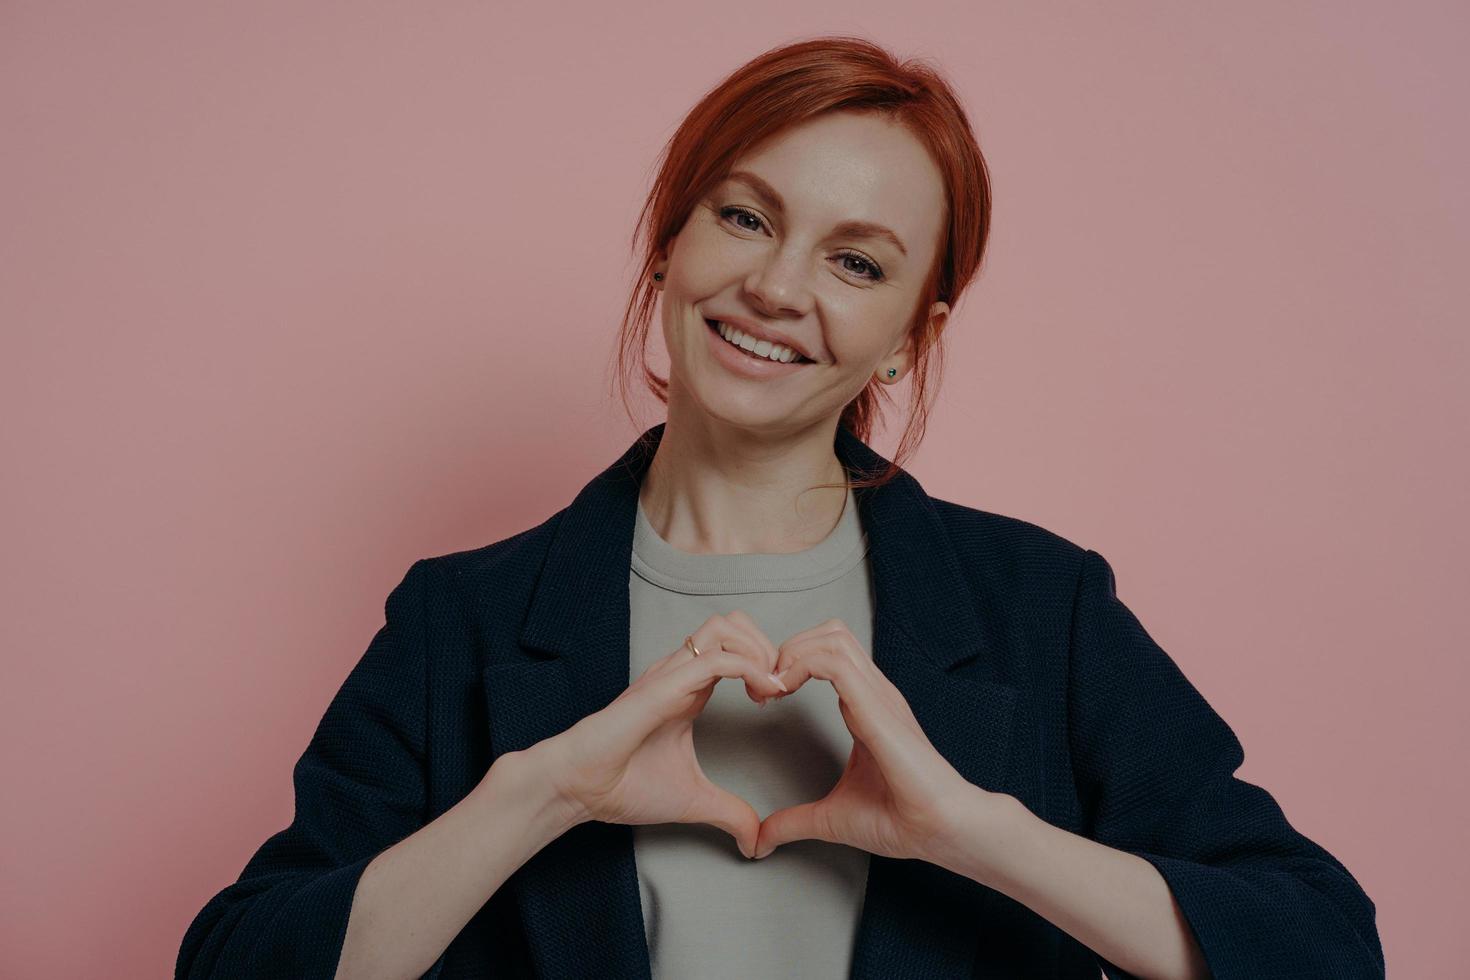 Isolated studio shot of young kind smiling redhead female making heart shape with both hands photo